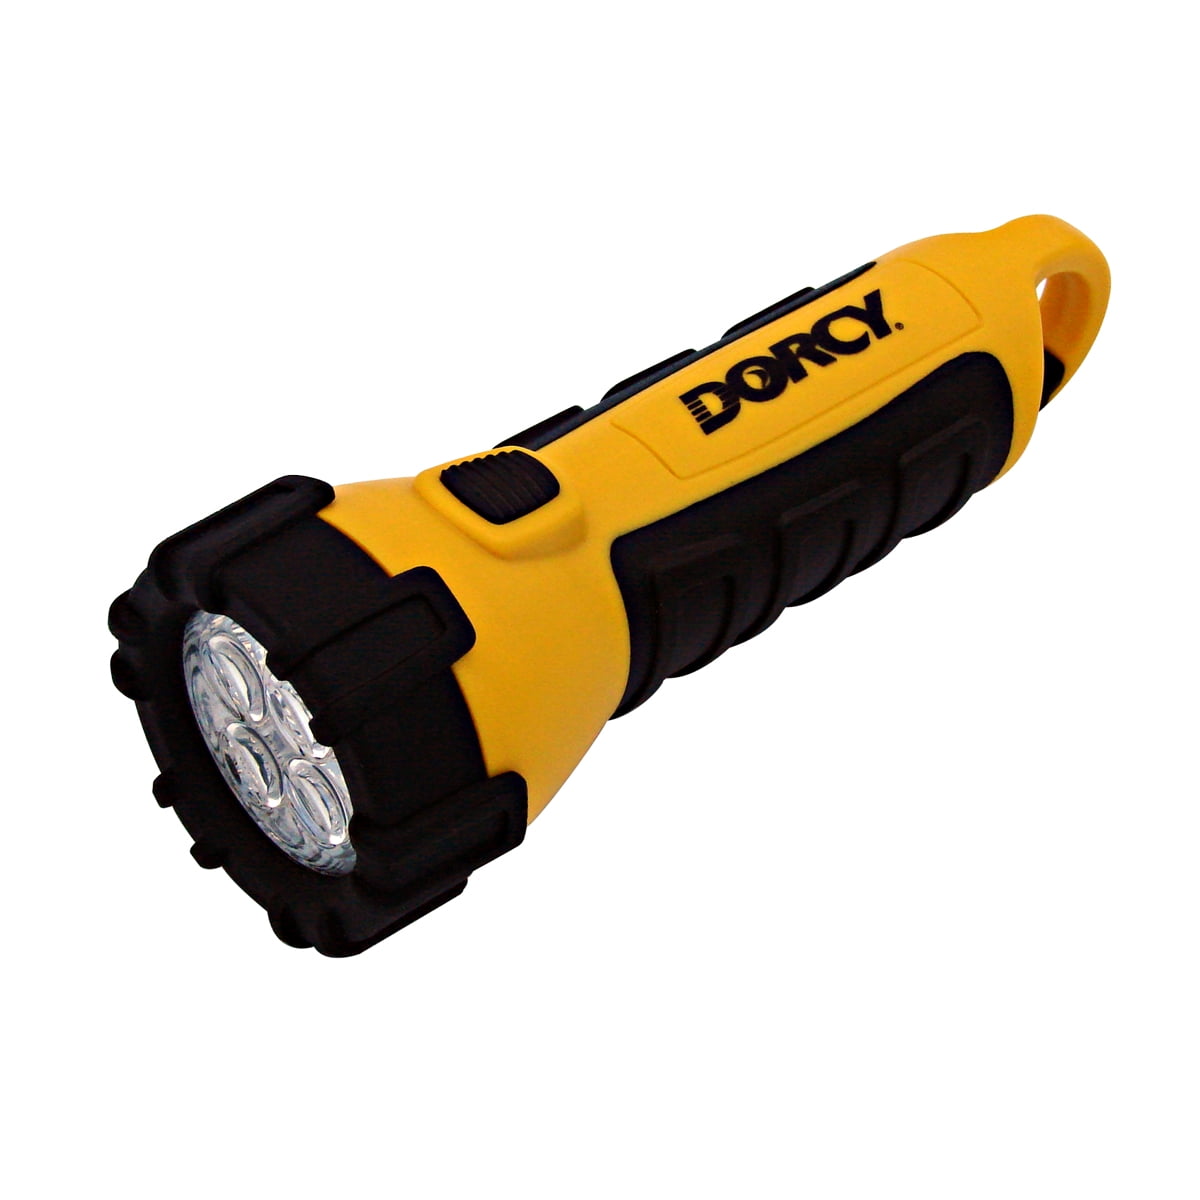 Dorcy 41-2510 Floating Waterproof LED Flashlight with Carabineer Cli 412510 NEW 